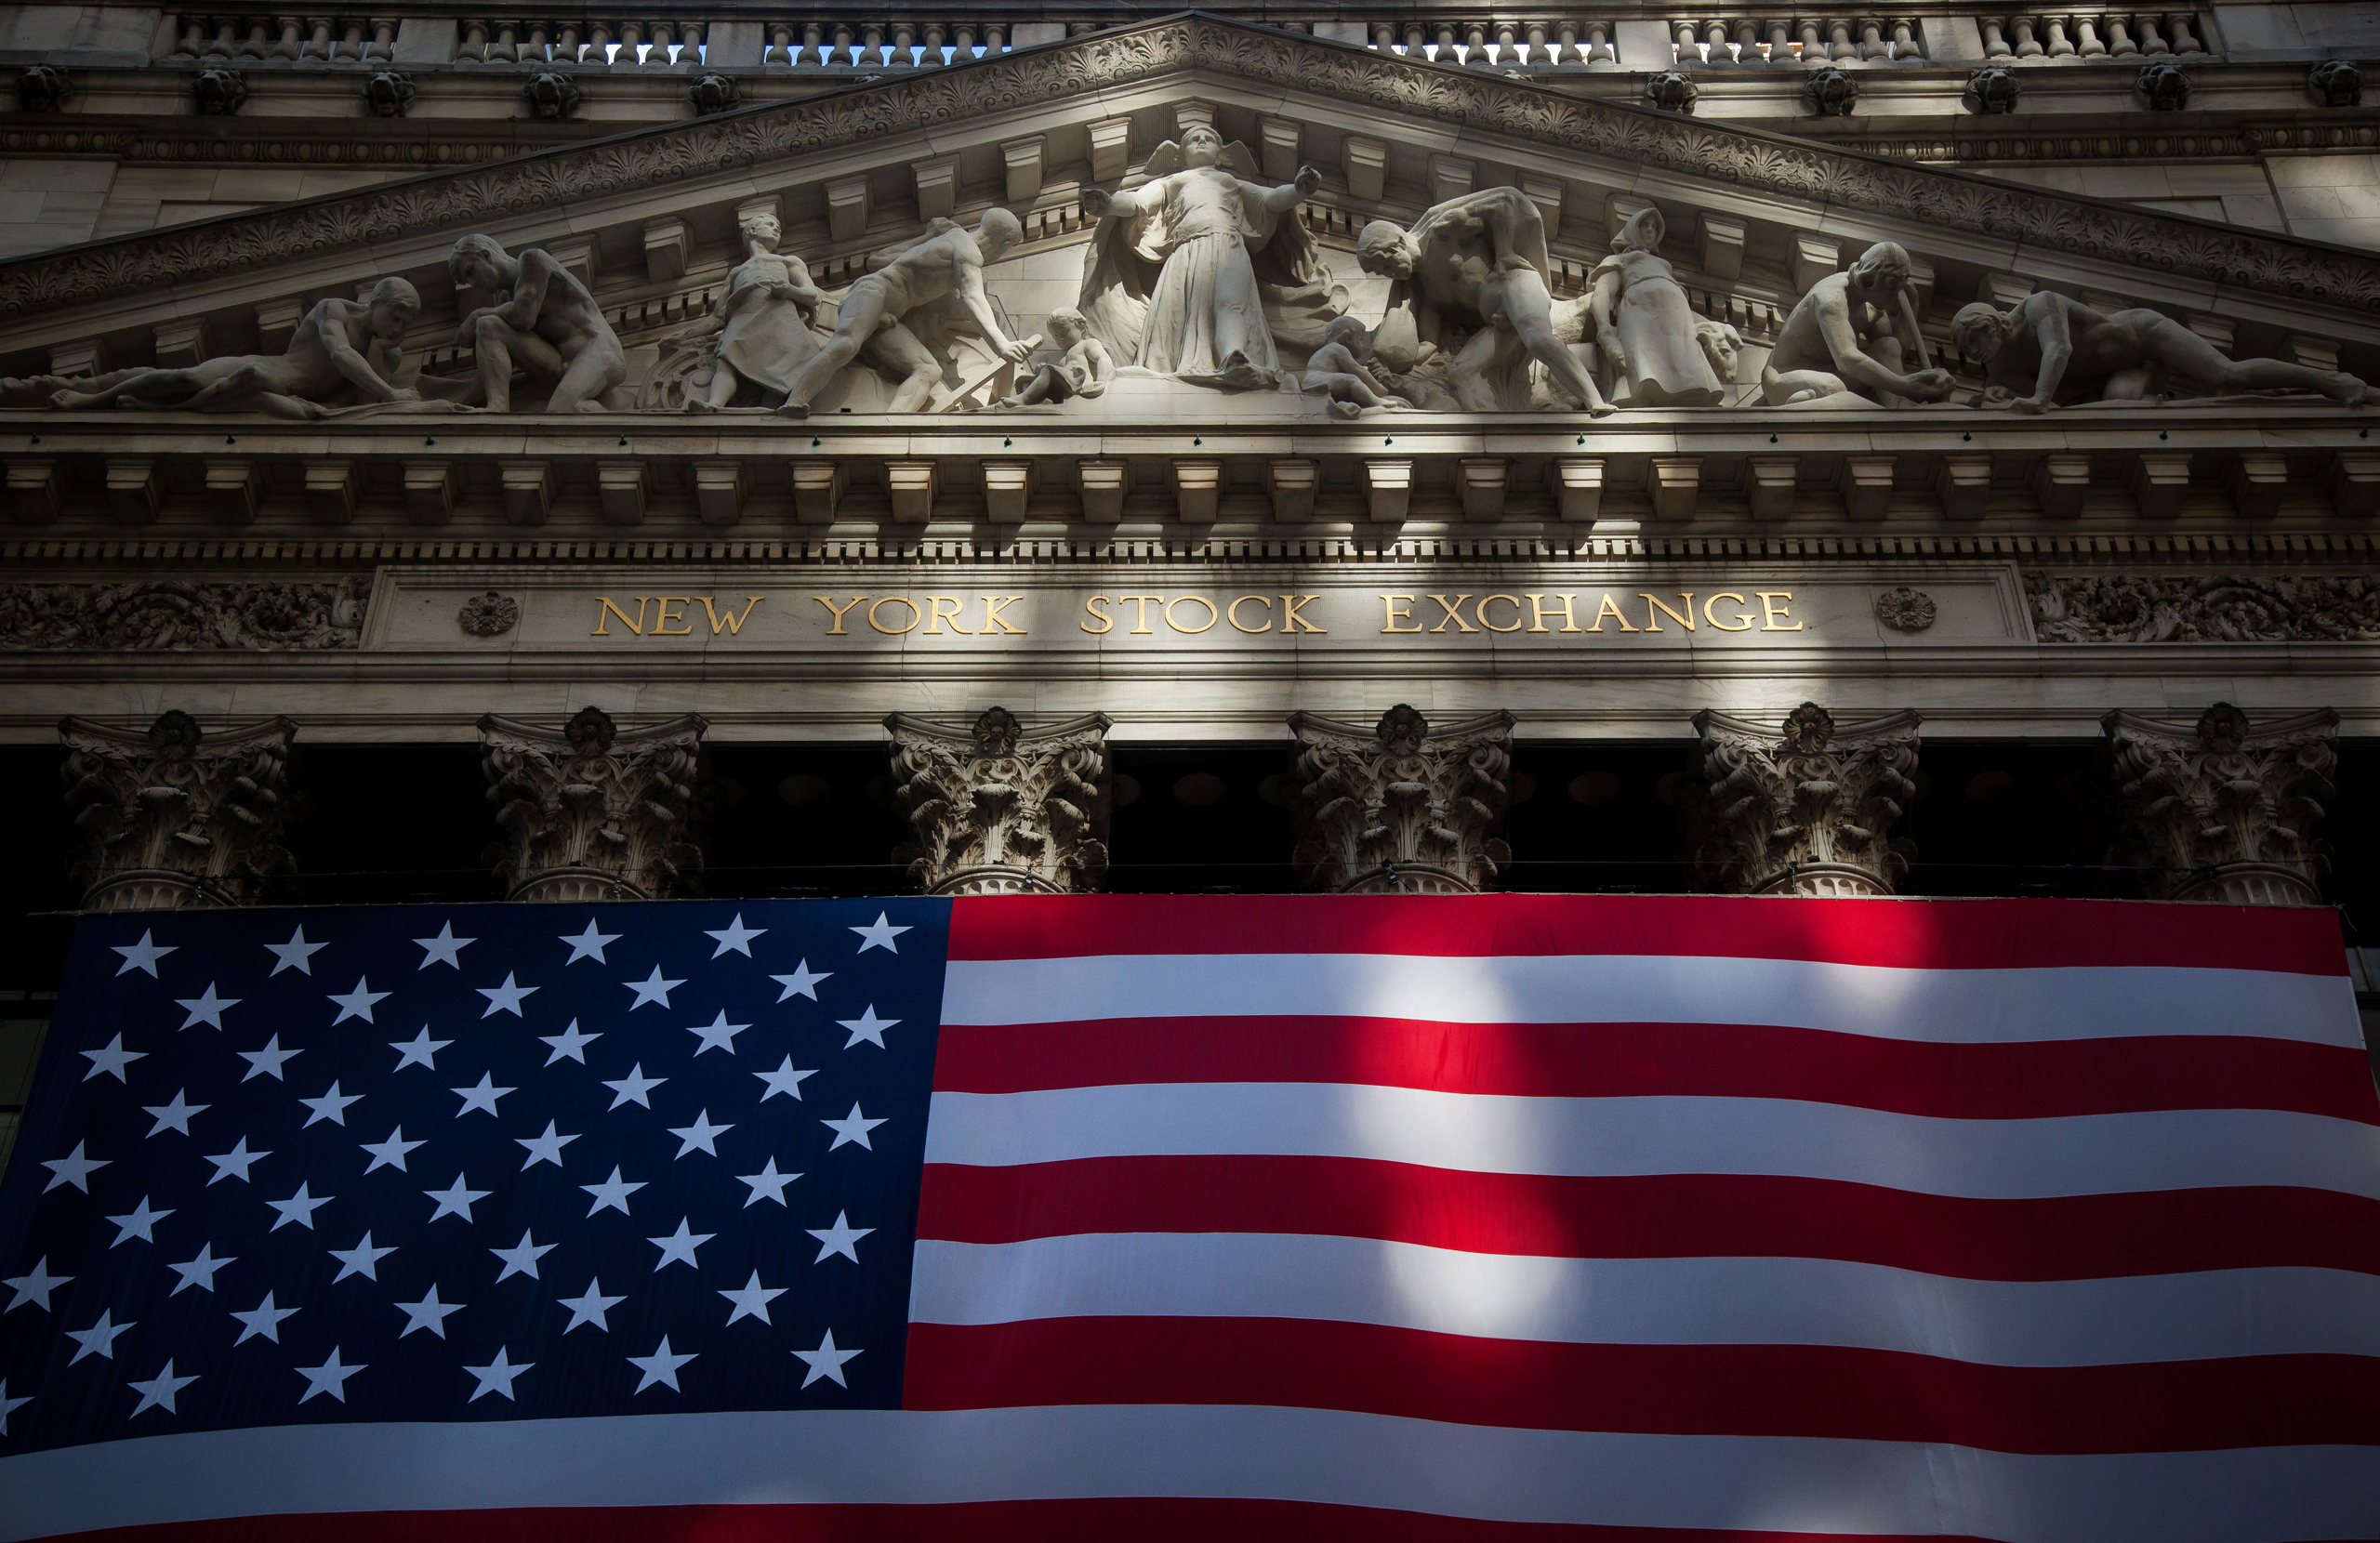 Trading On The Floor Of The NYSE As U.S. Stocks Pare Declines While Small Caps Fuel Election Rally